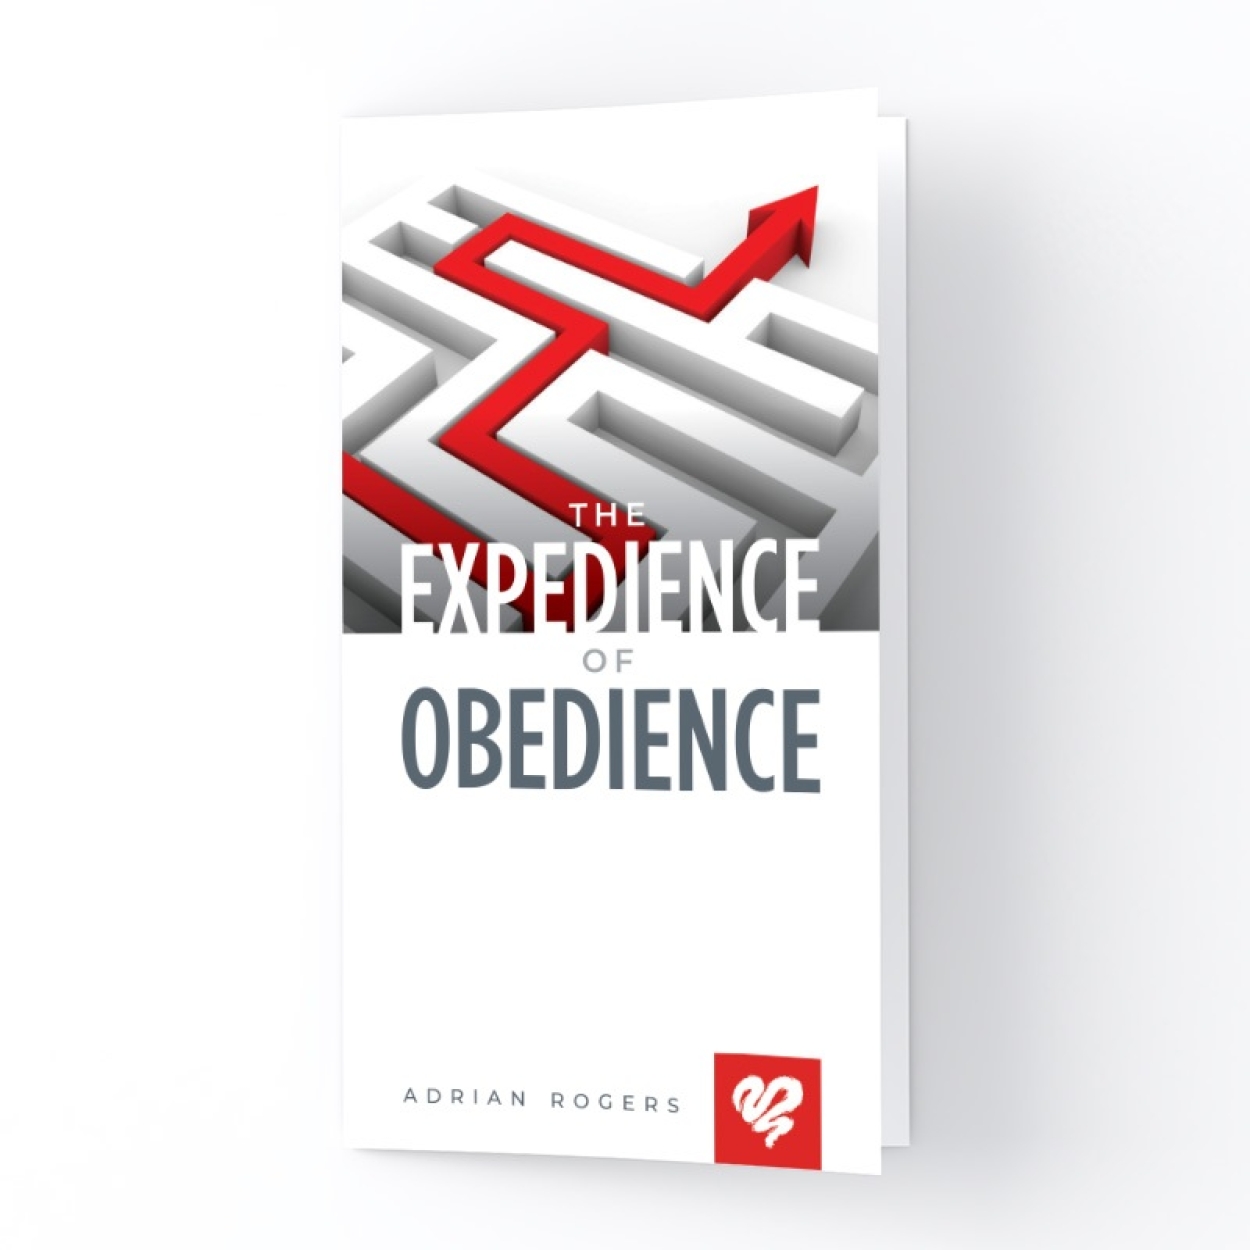 K167 The Expedience of Obedience Square